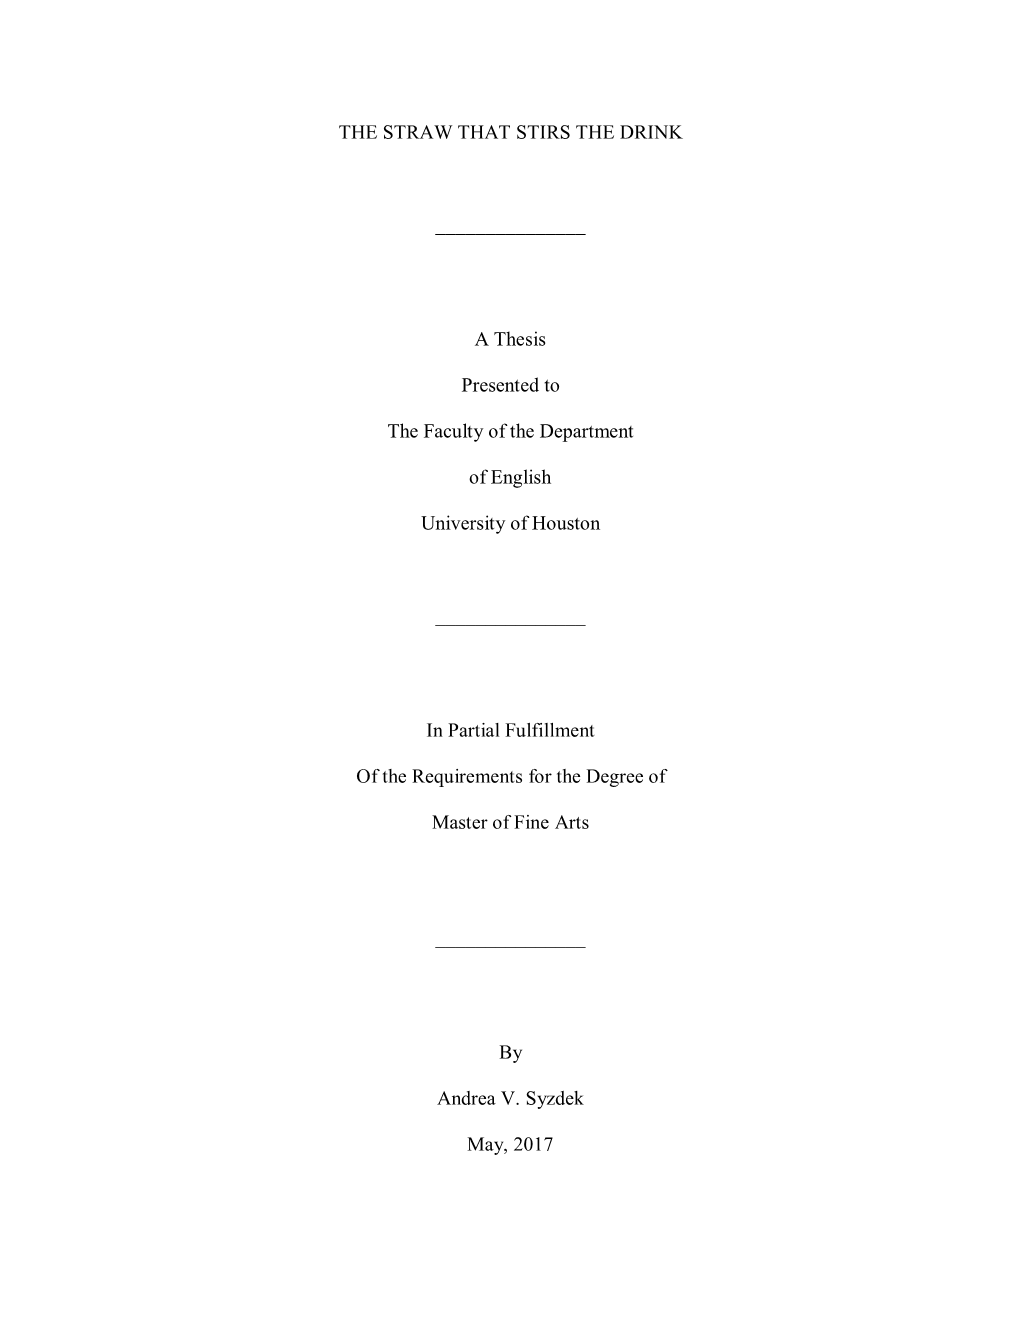 A Thesis Presented to the Faculty of the Department of English